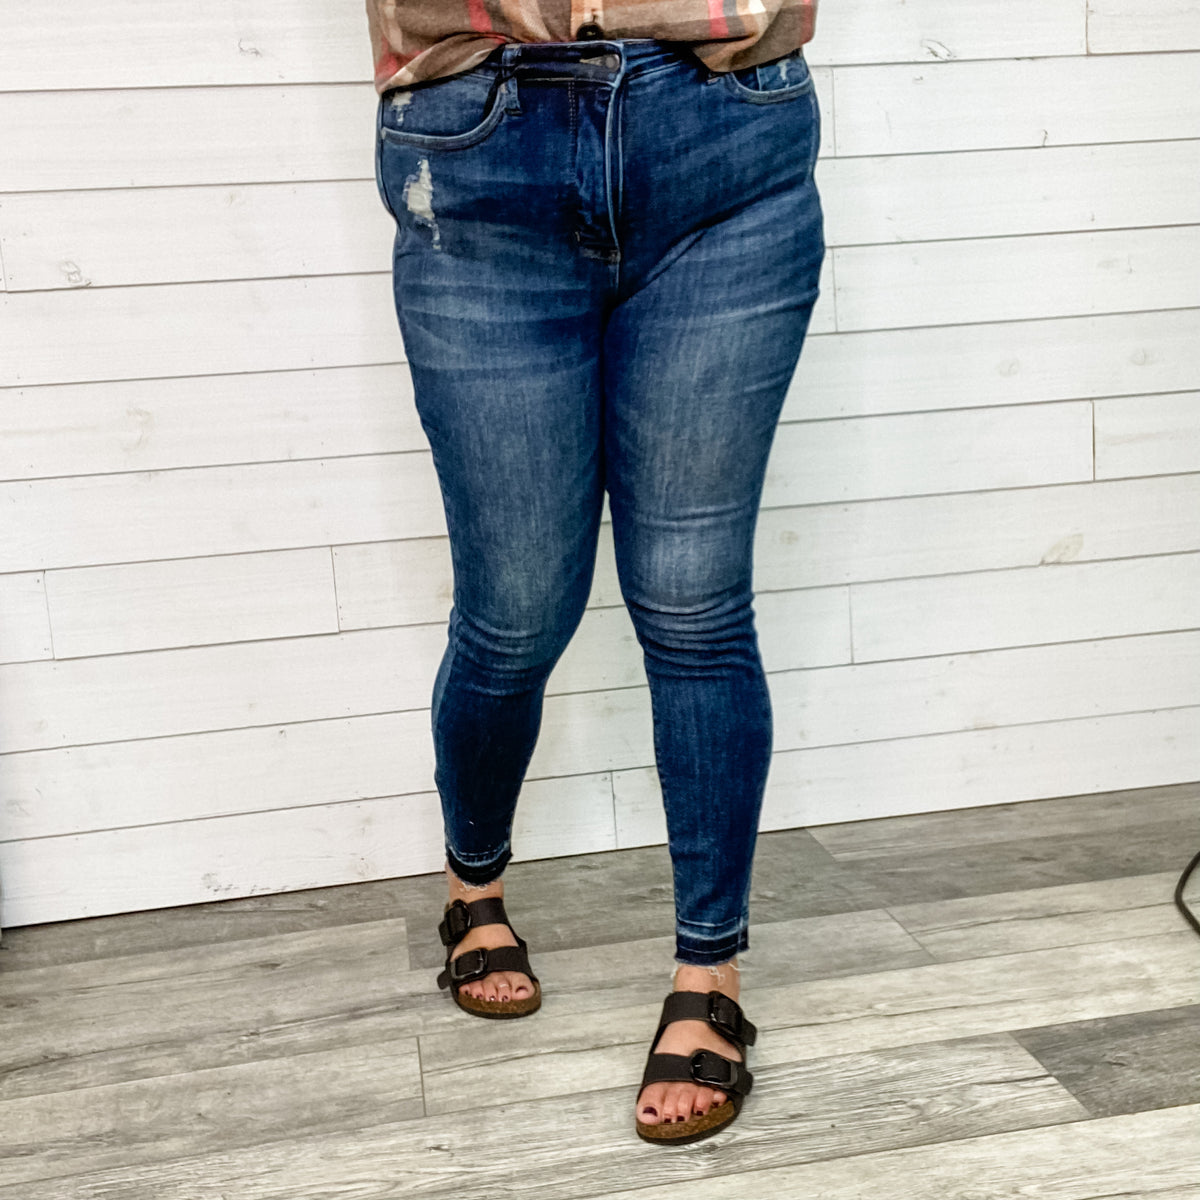 High Expectations Tummy Control Jeans by Judy Blue – The Teal